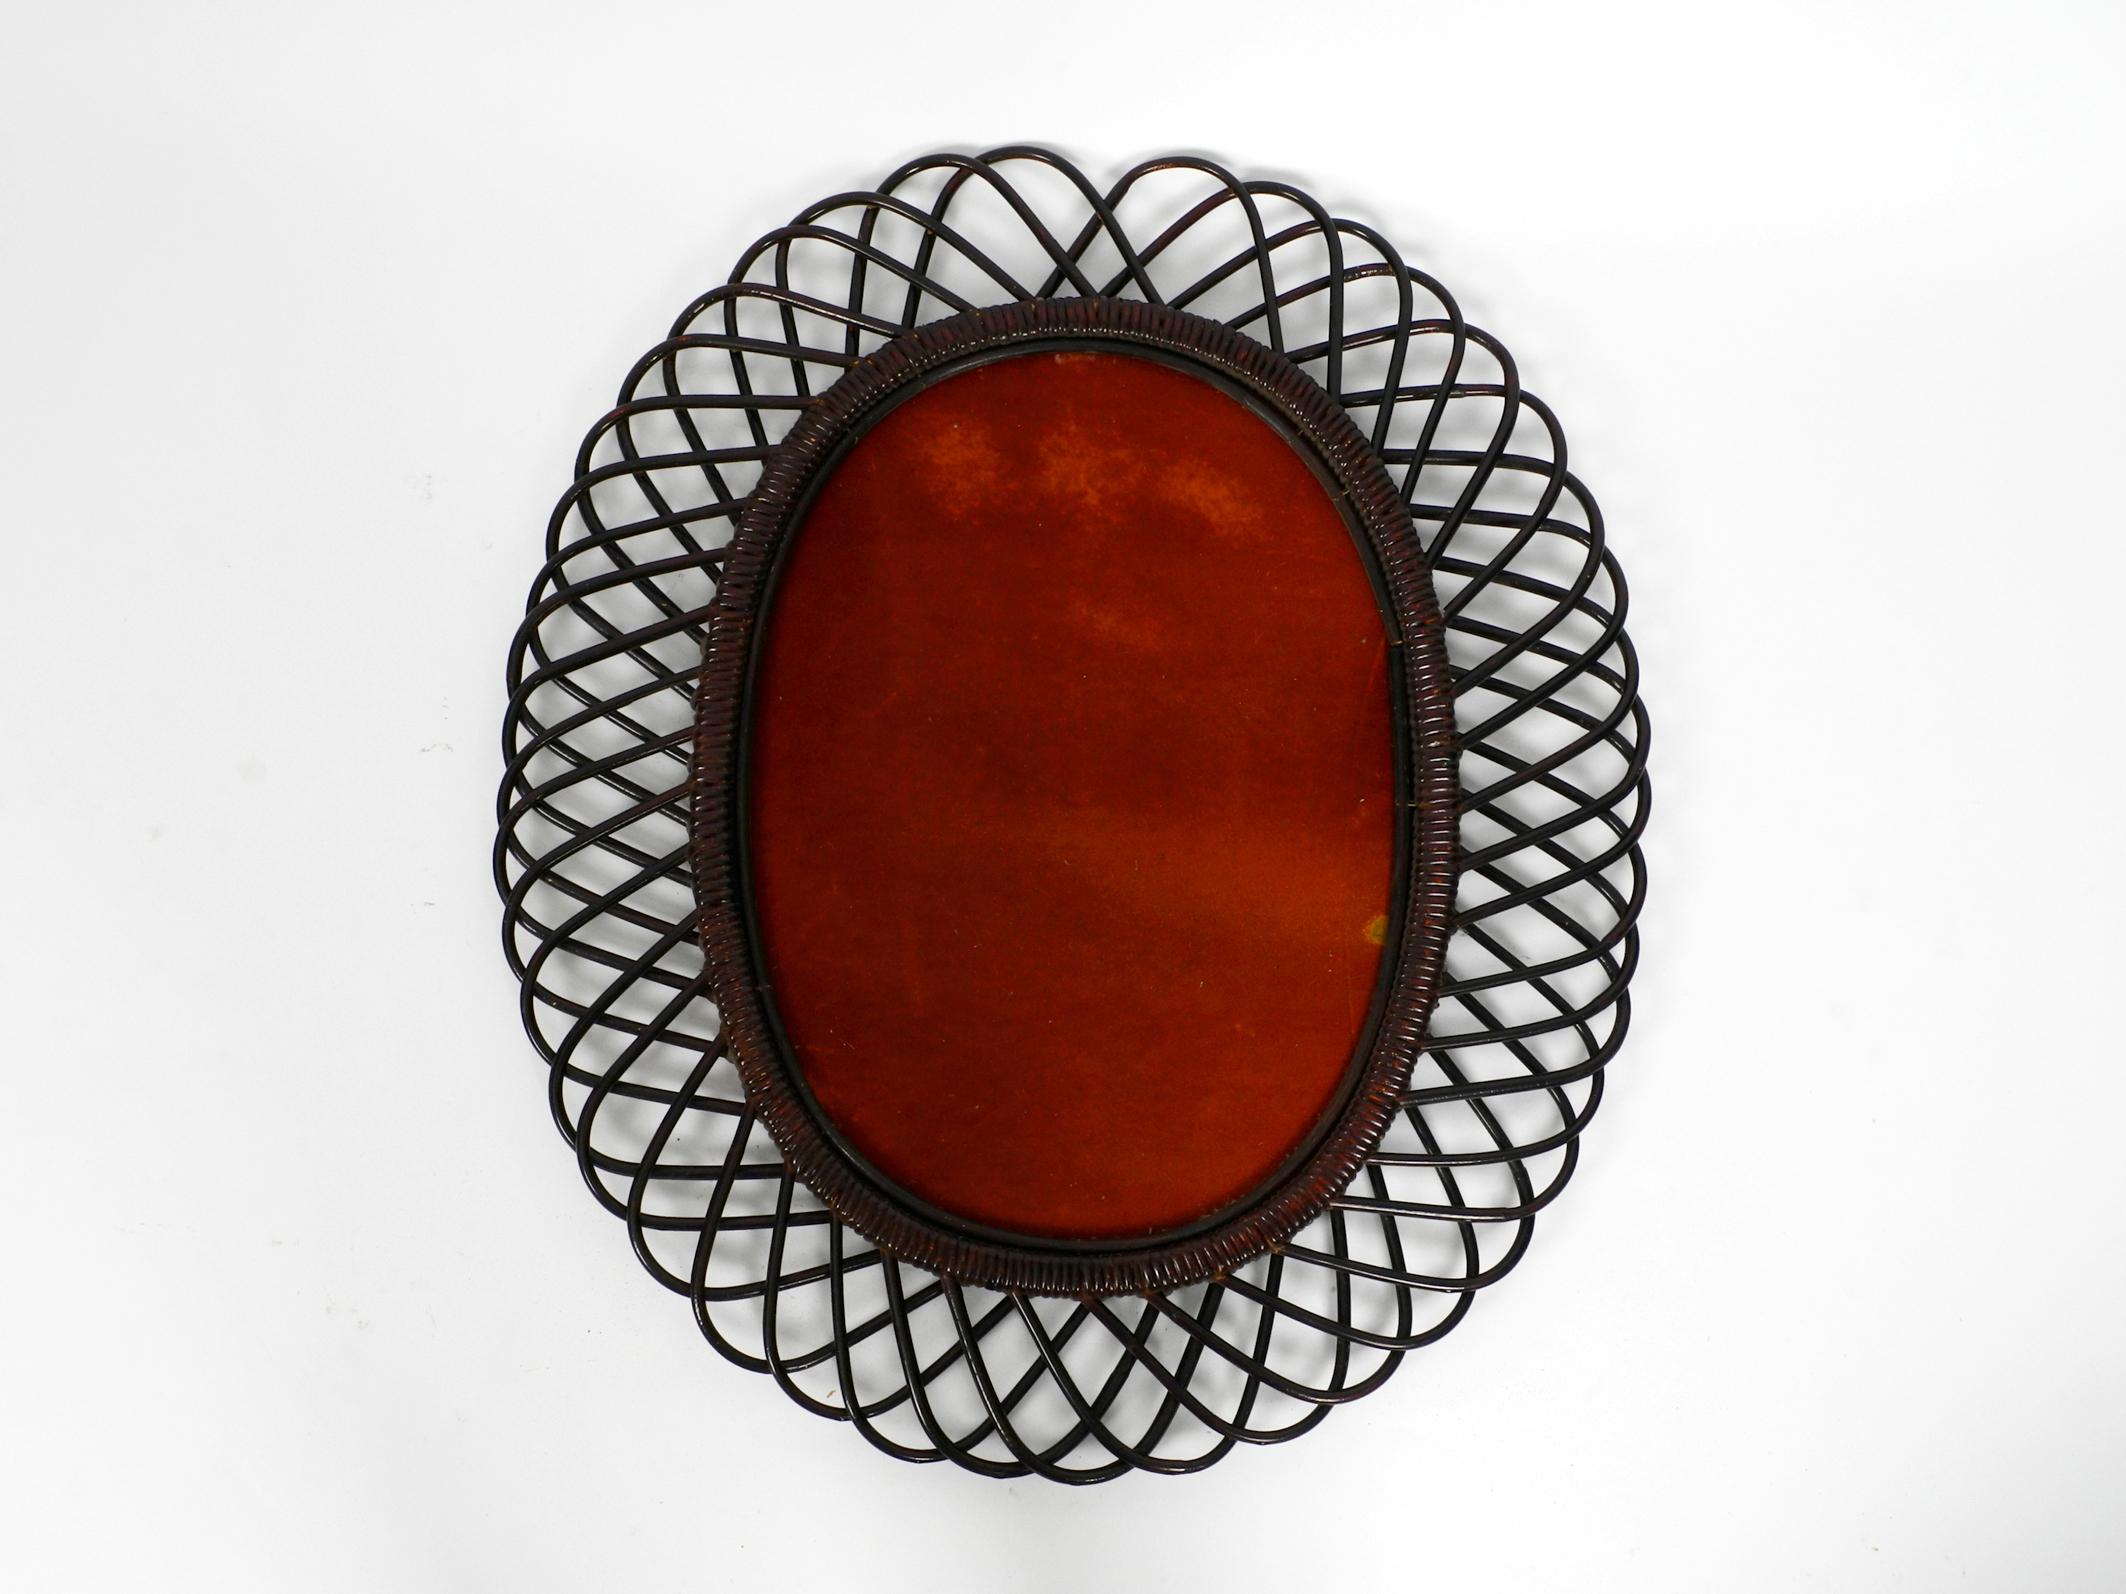 1960s Italian Large Oval Mahogany Colored Bamboo Wall Mirror in Loop Design 4